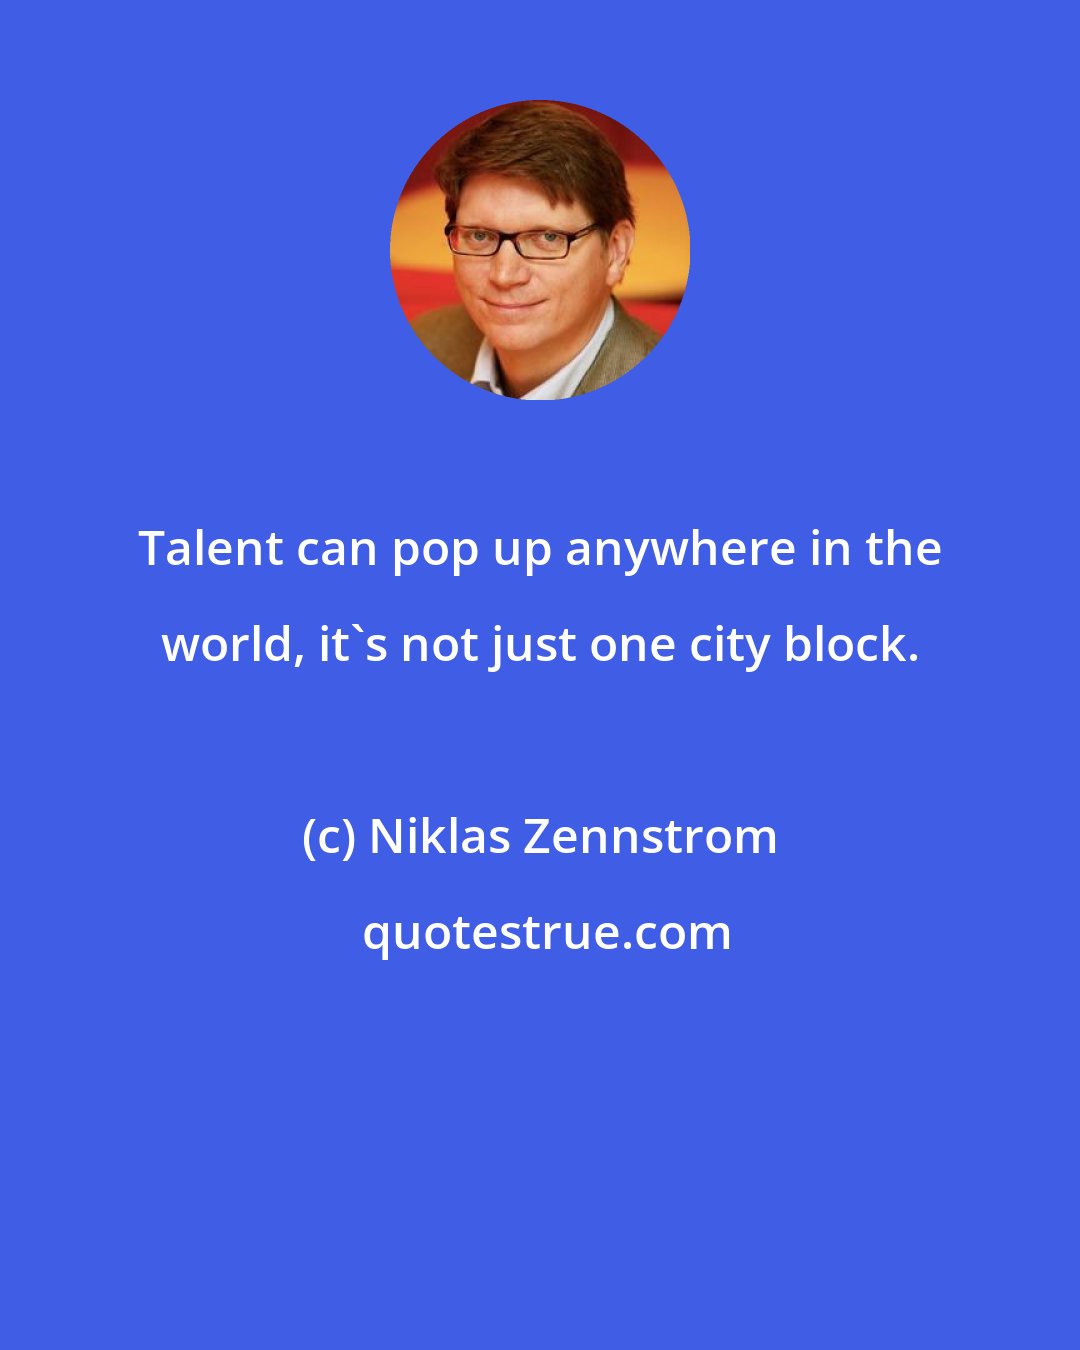 Niklas Zennstrom: Talent can pop up anywhere in the world, it's not just one city block.